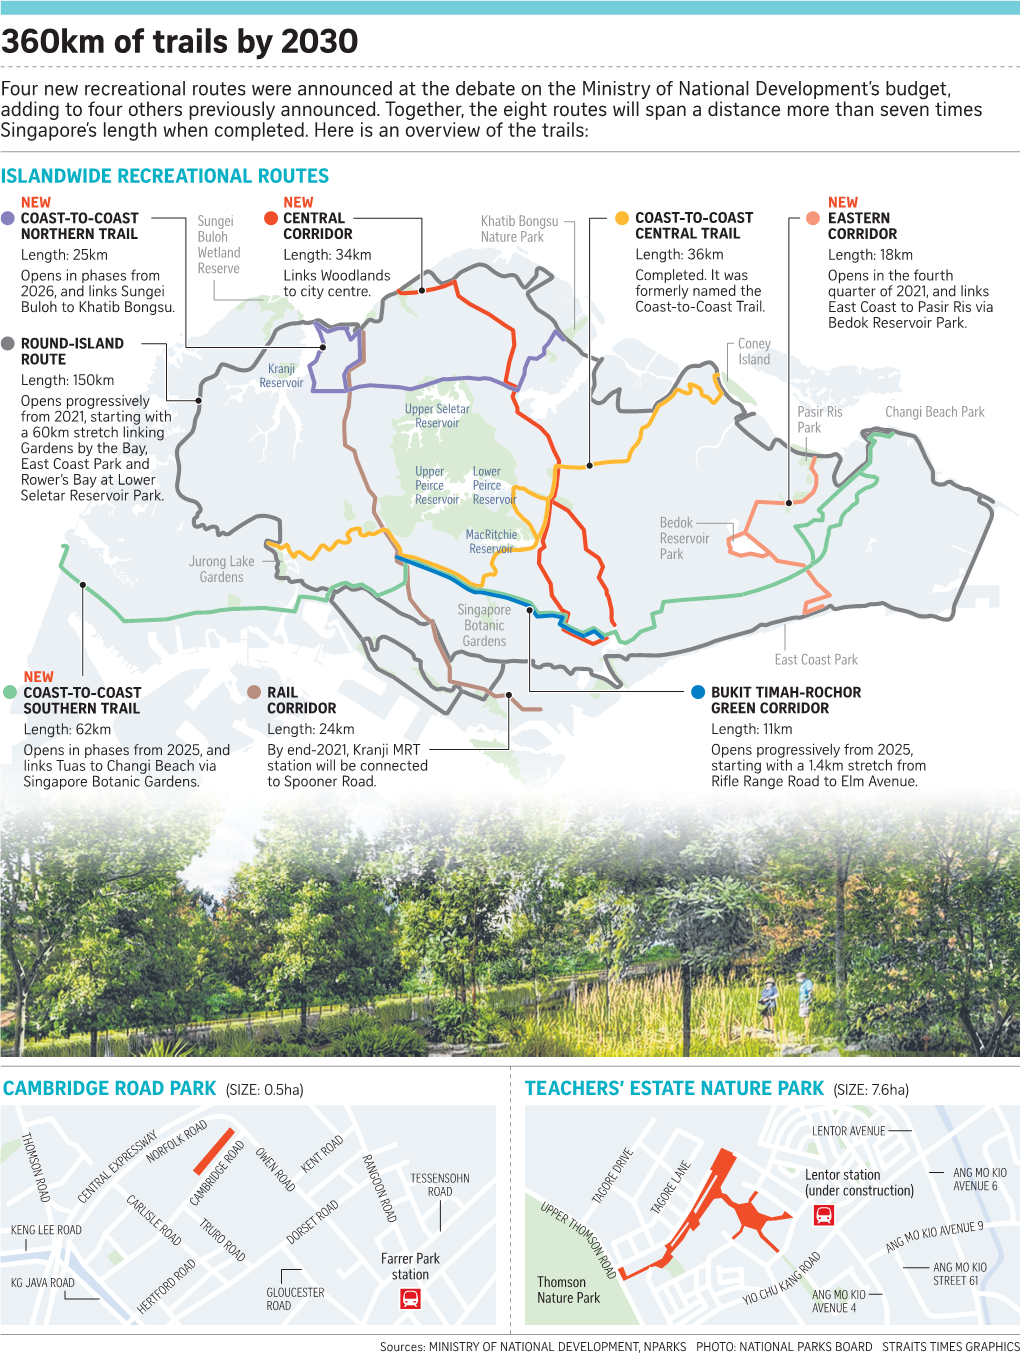 360Km of Trails by 2030